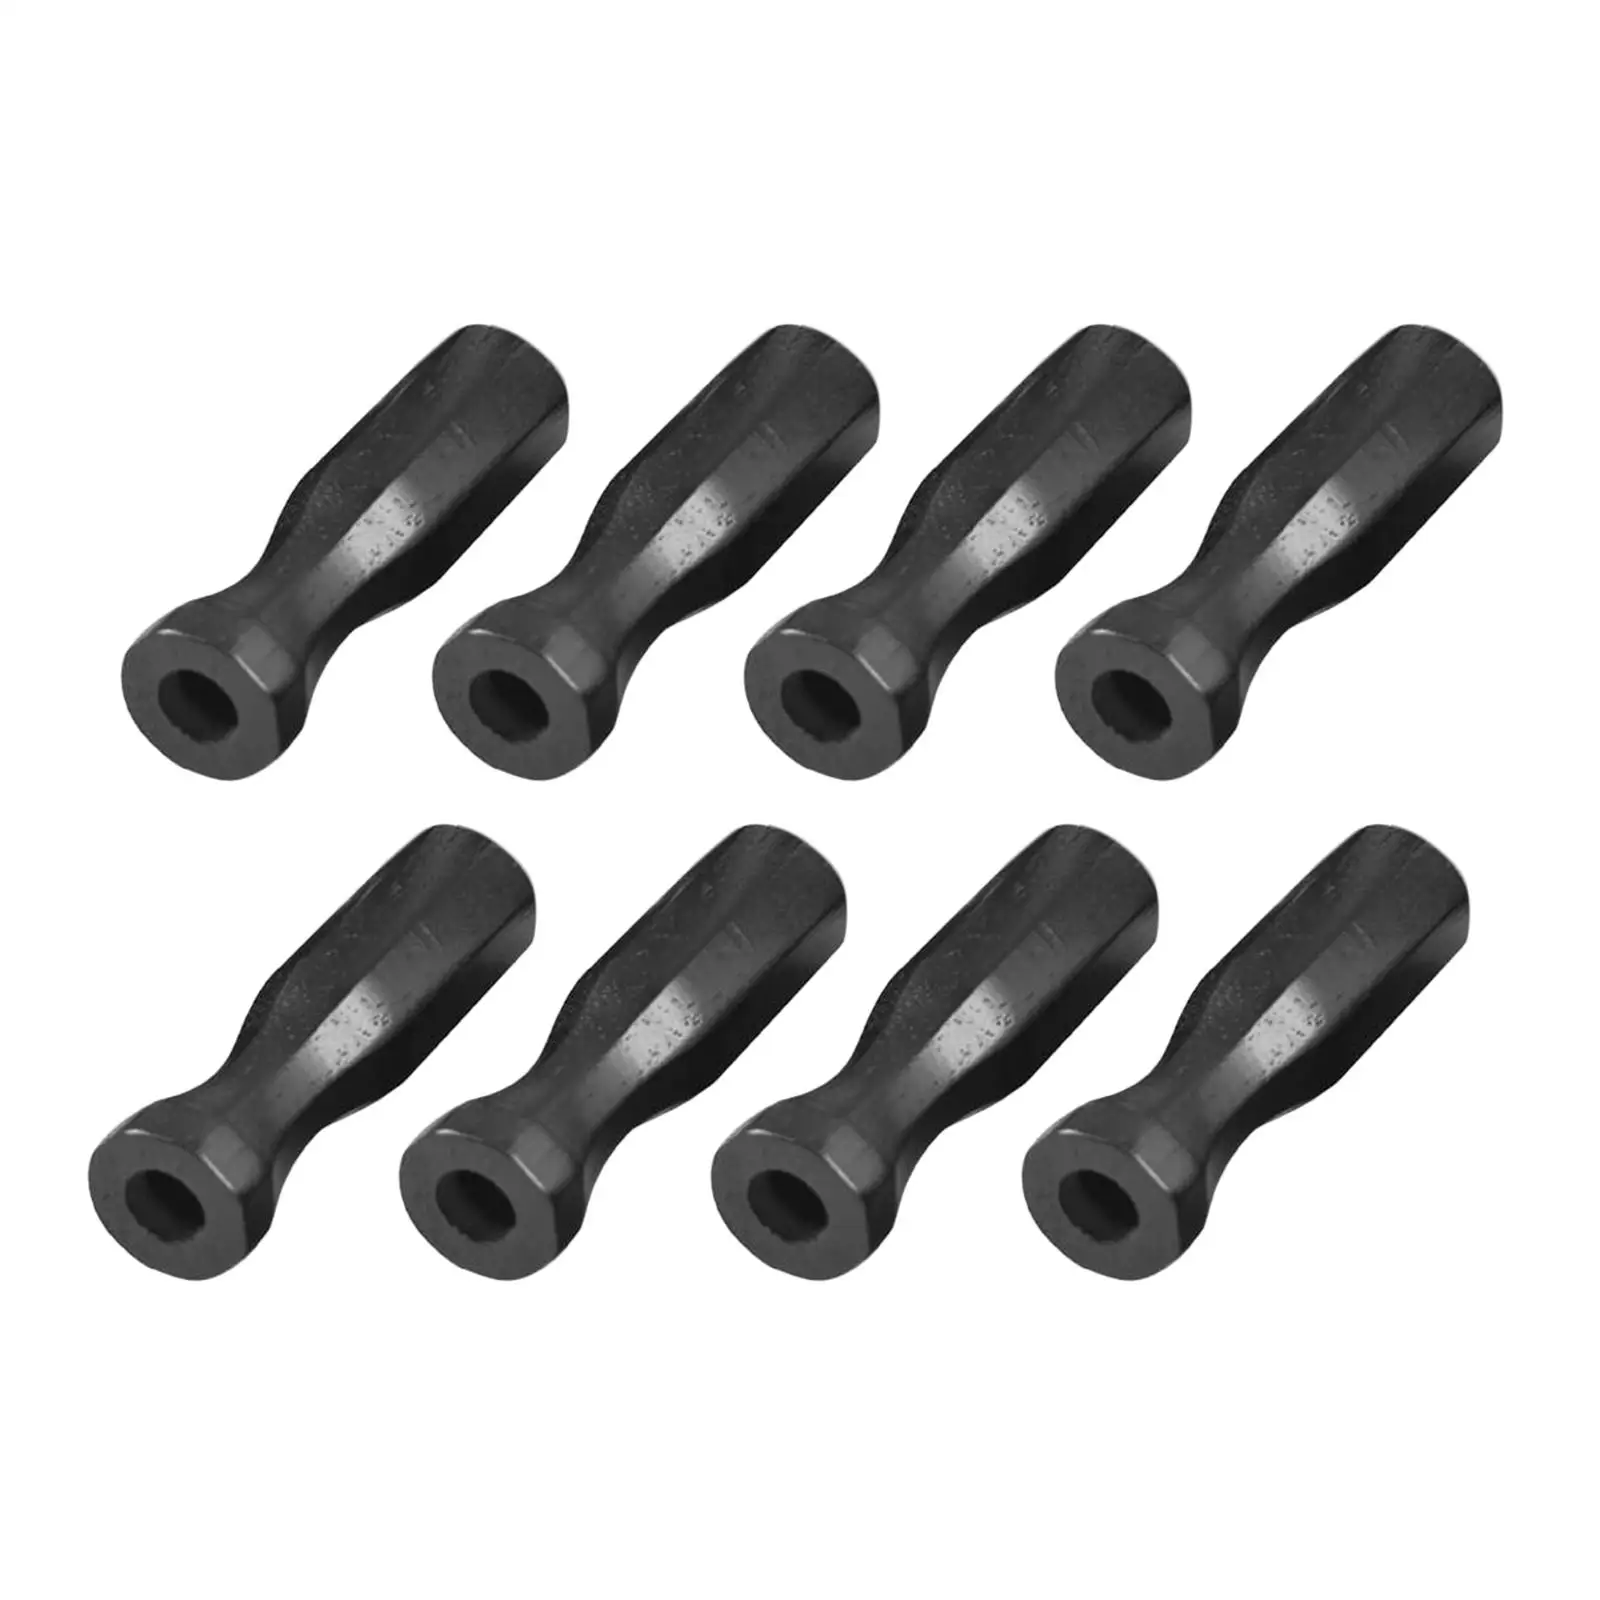 8Pcs Soccer Table Handles Non Slip Part Accessory Replacements for Foosball Tables Indoor Table Soccer Children Soccer Machine